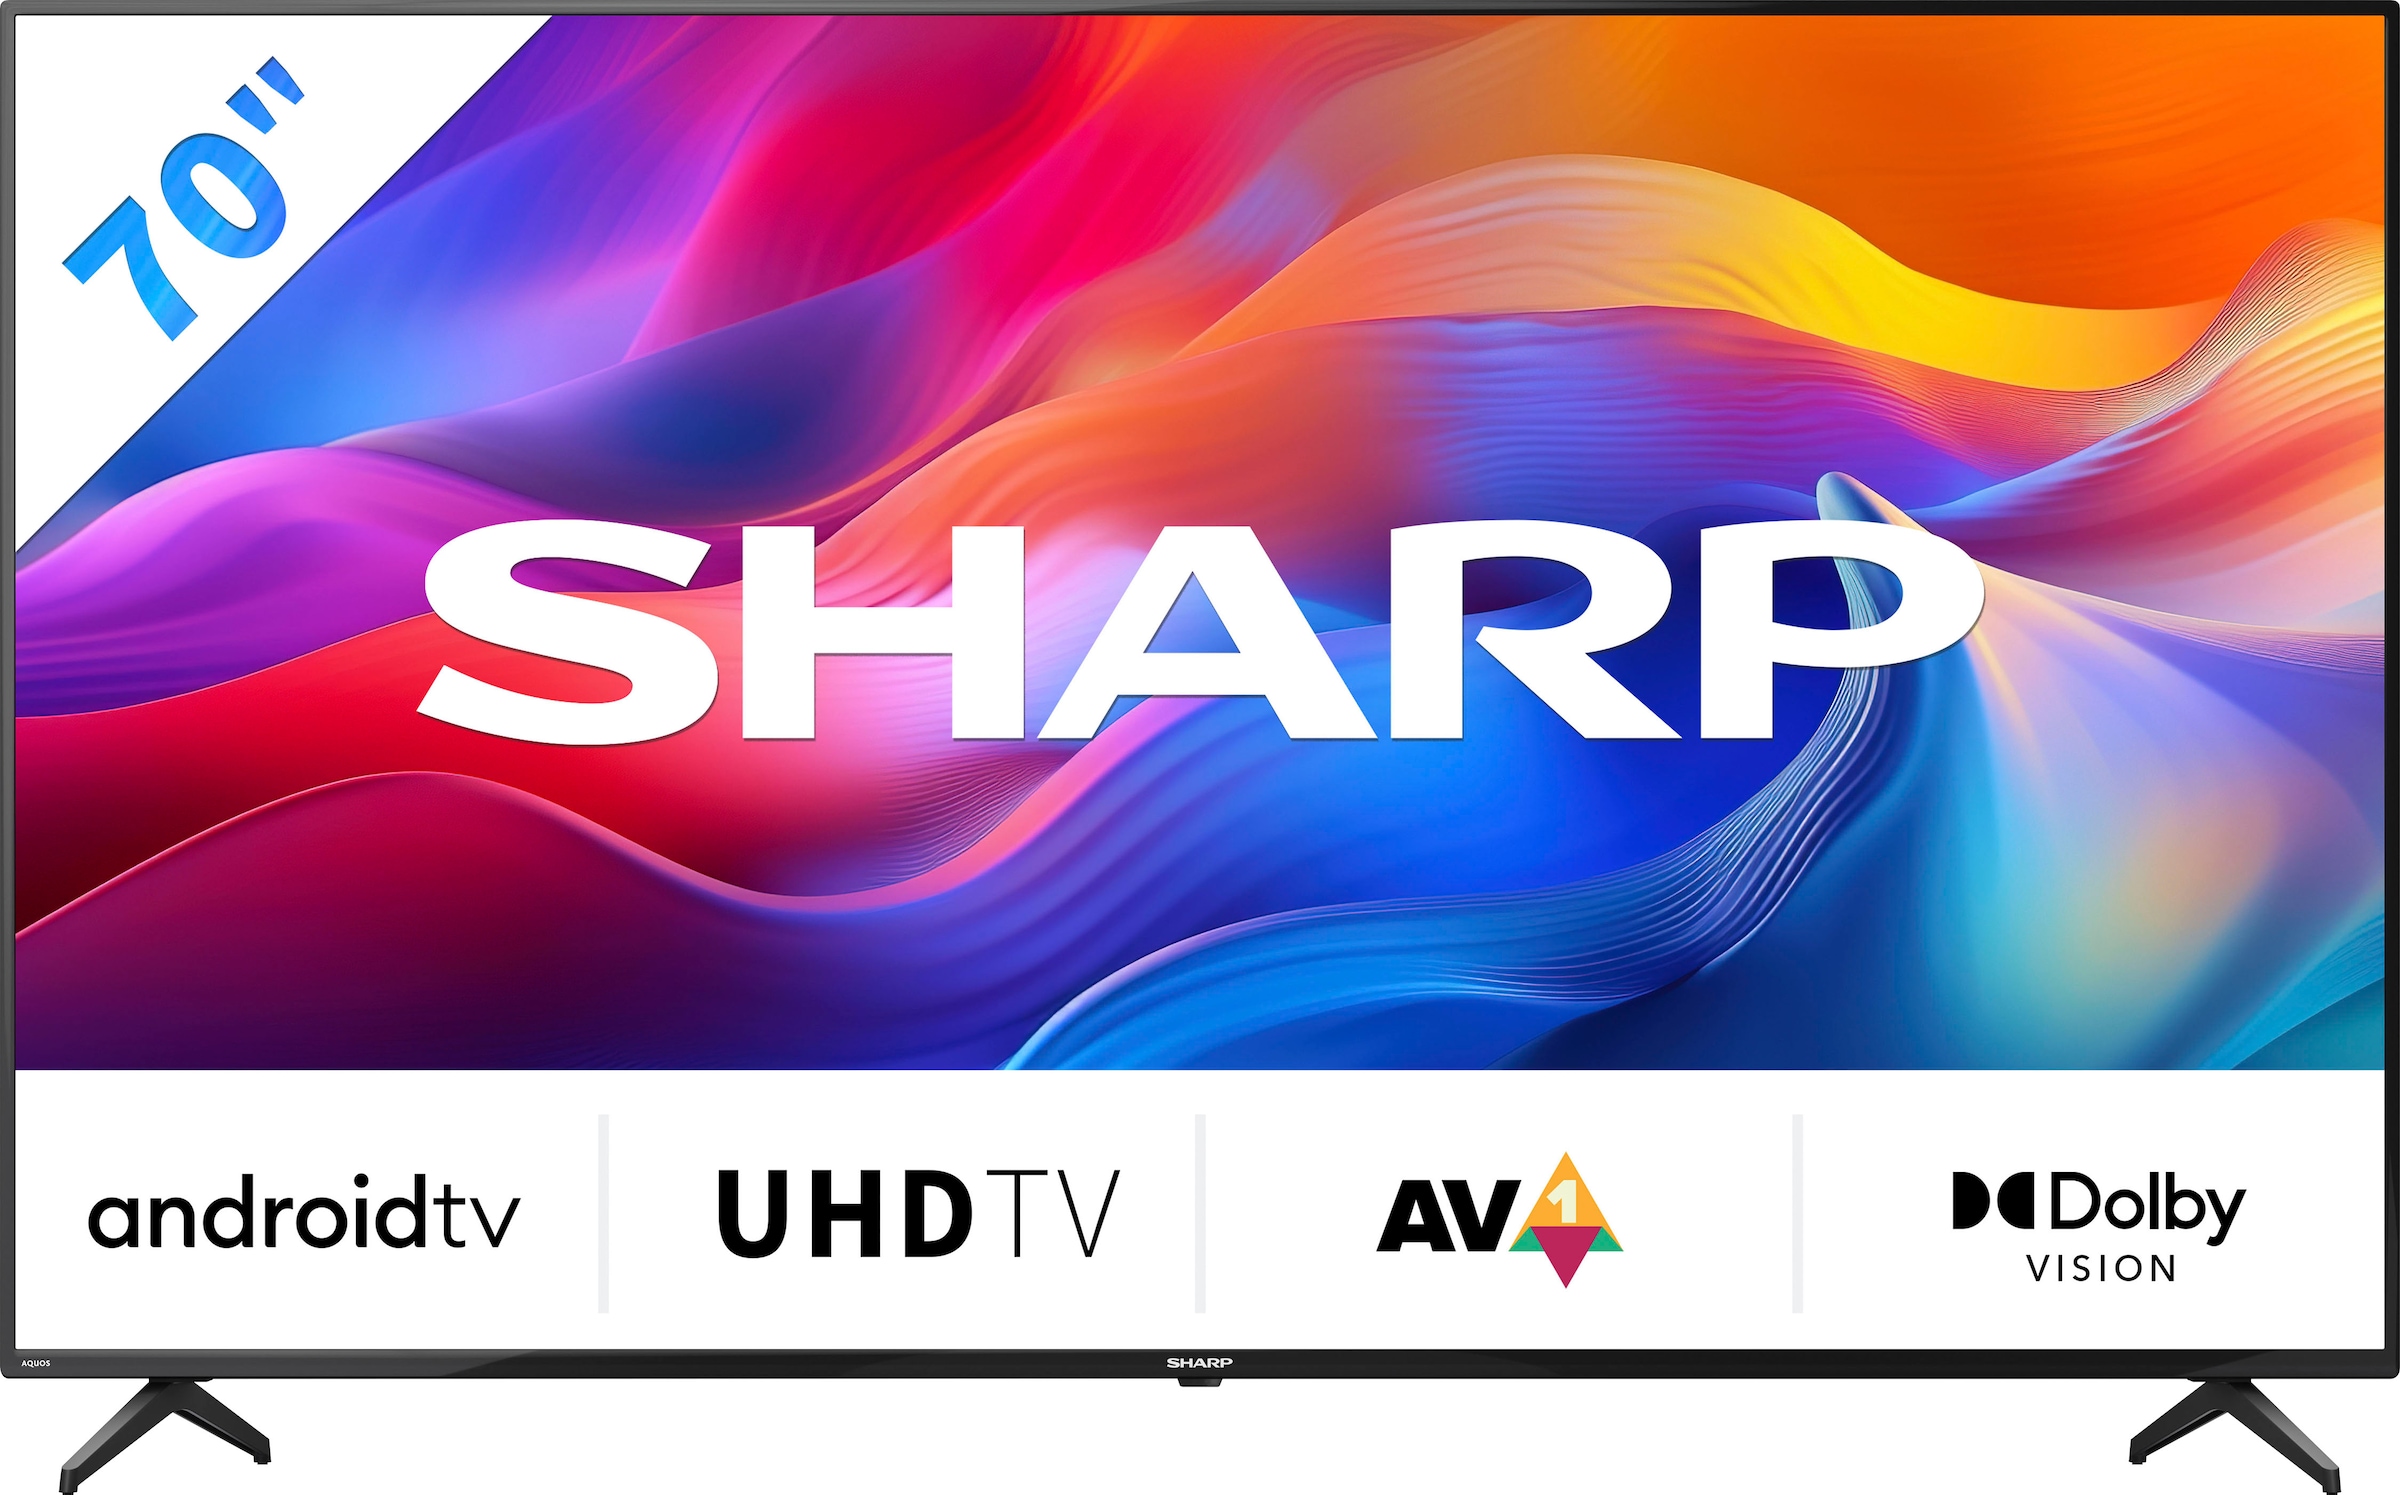 70 4K ULTRA HD SHARP ANDROID TV™